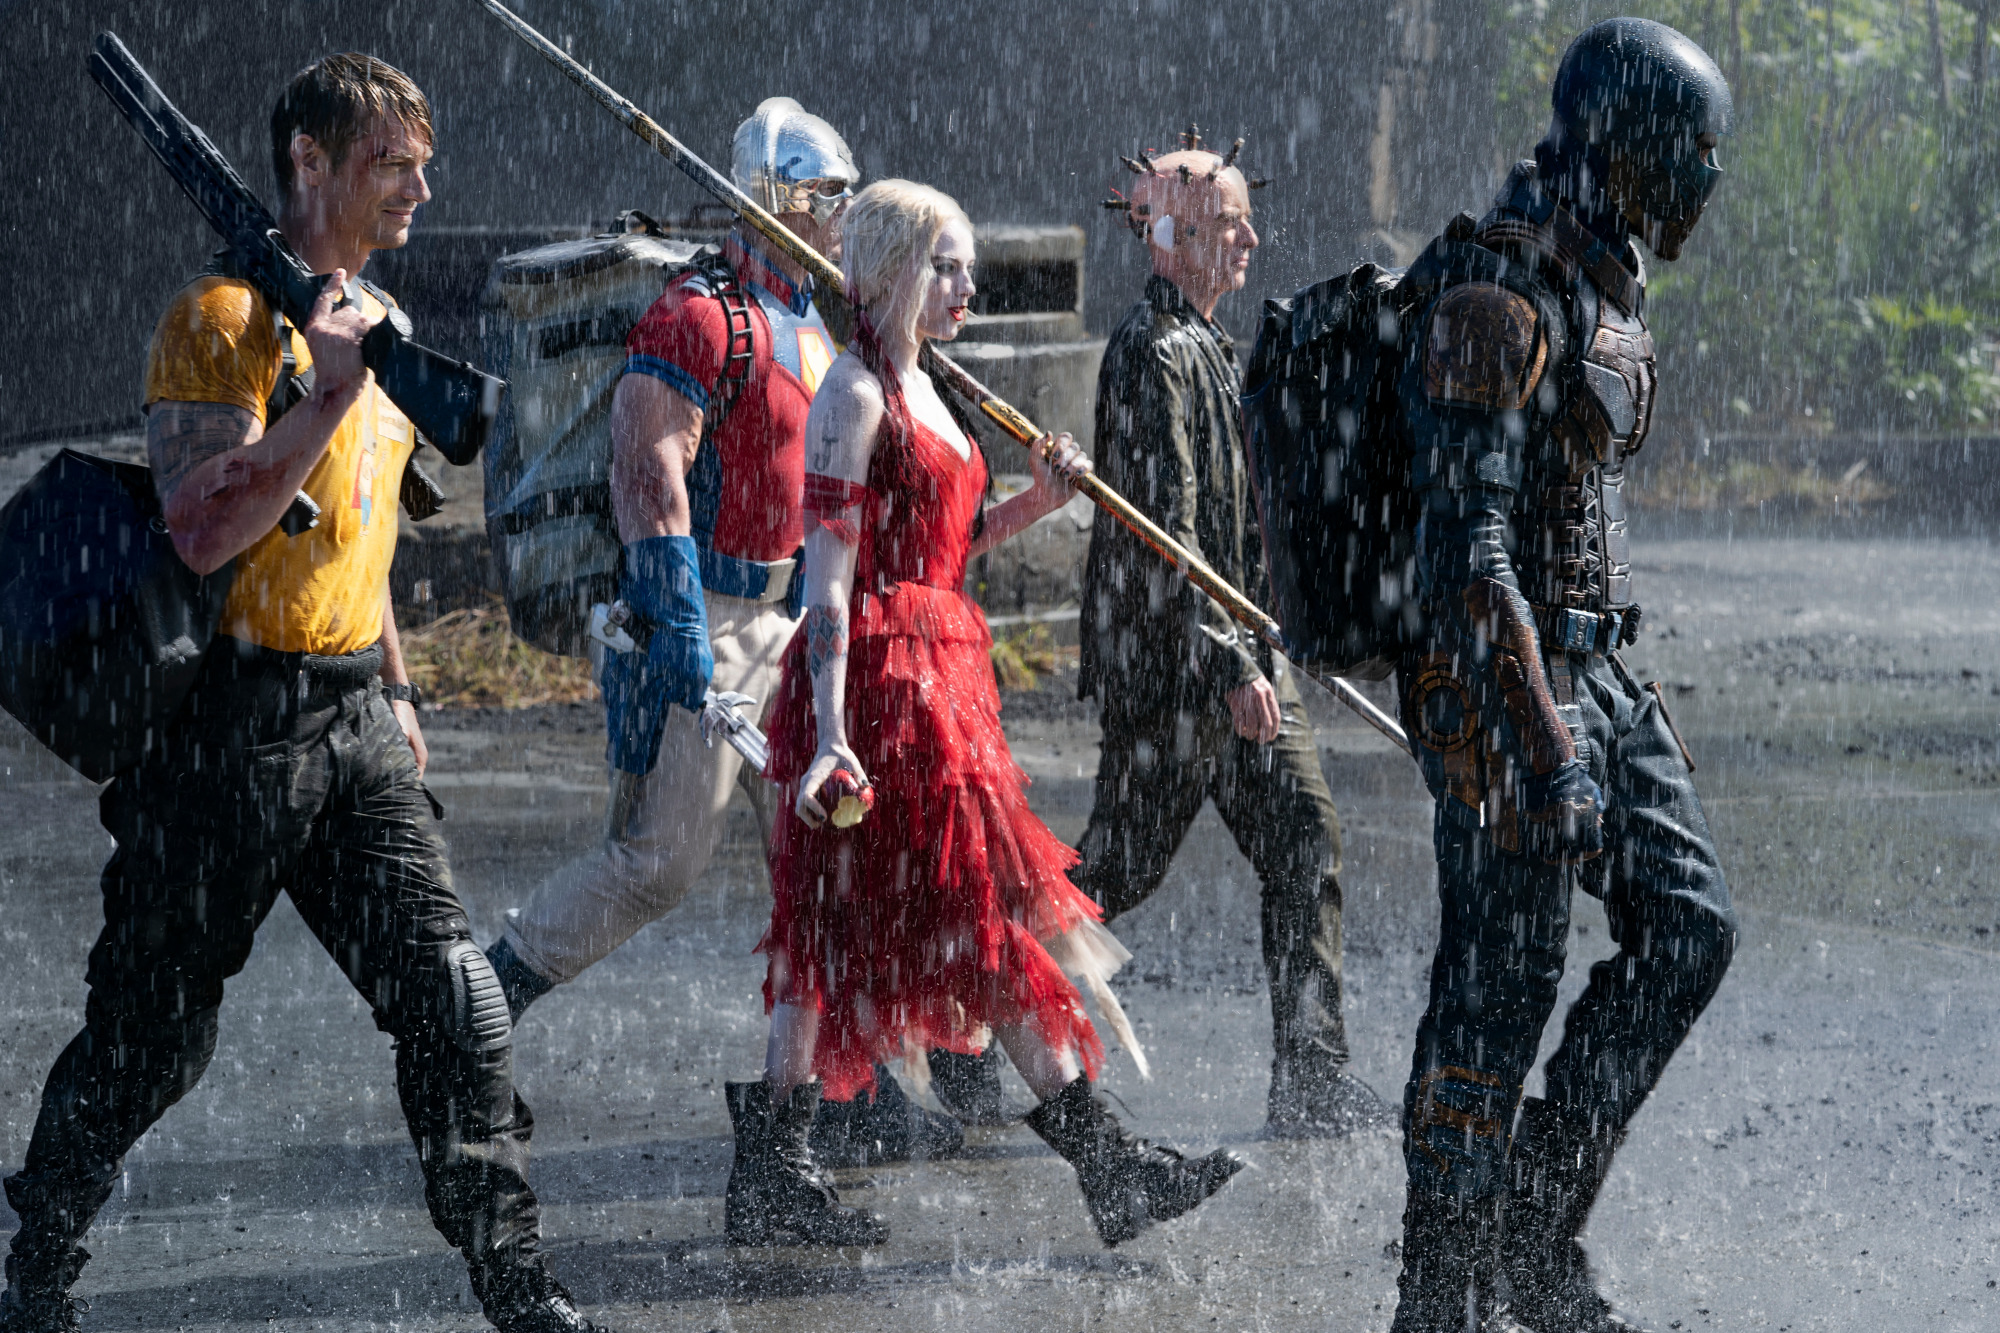 The Suicide Squad team walking in the rain during James Gunn's 'The Suicide Squad,' which is strikingly similar to 'Suicide Squad: Kill the Justice League,' if the trailer is anything to judge by.